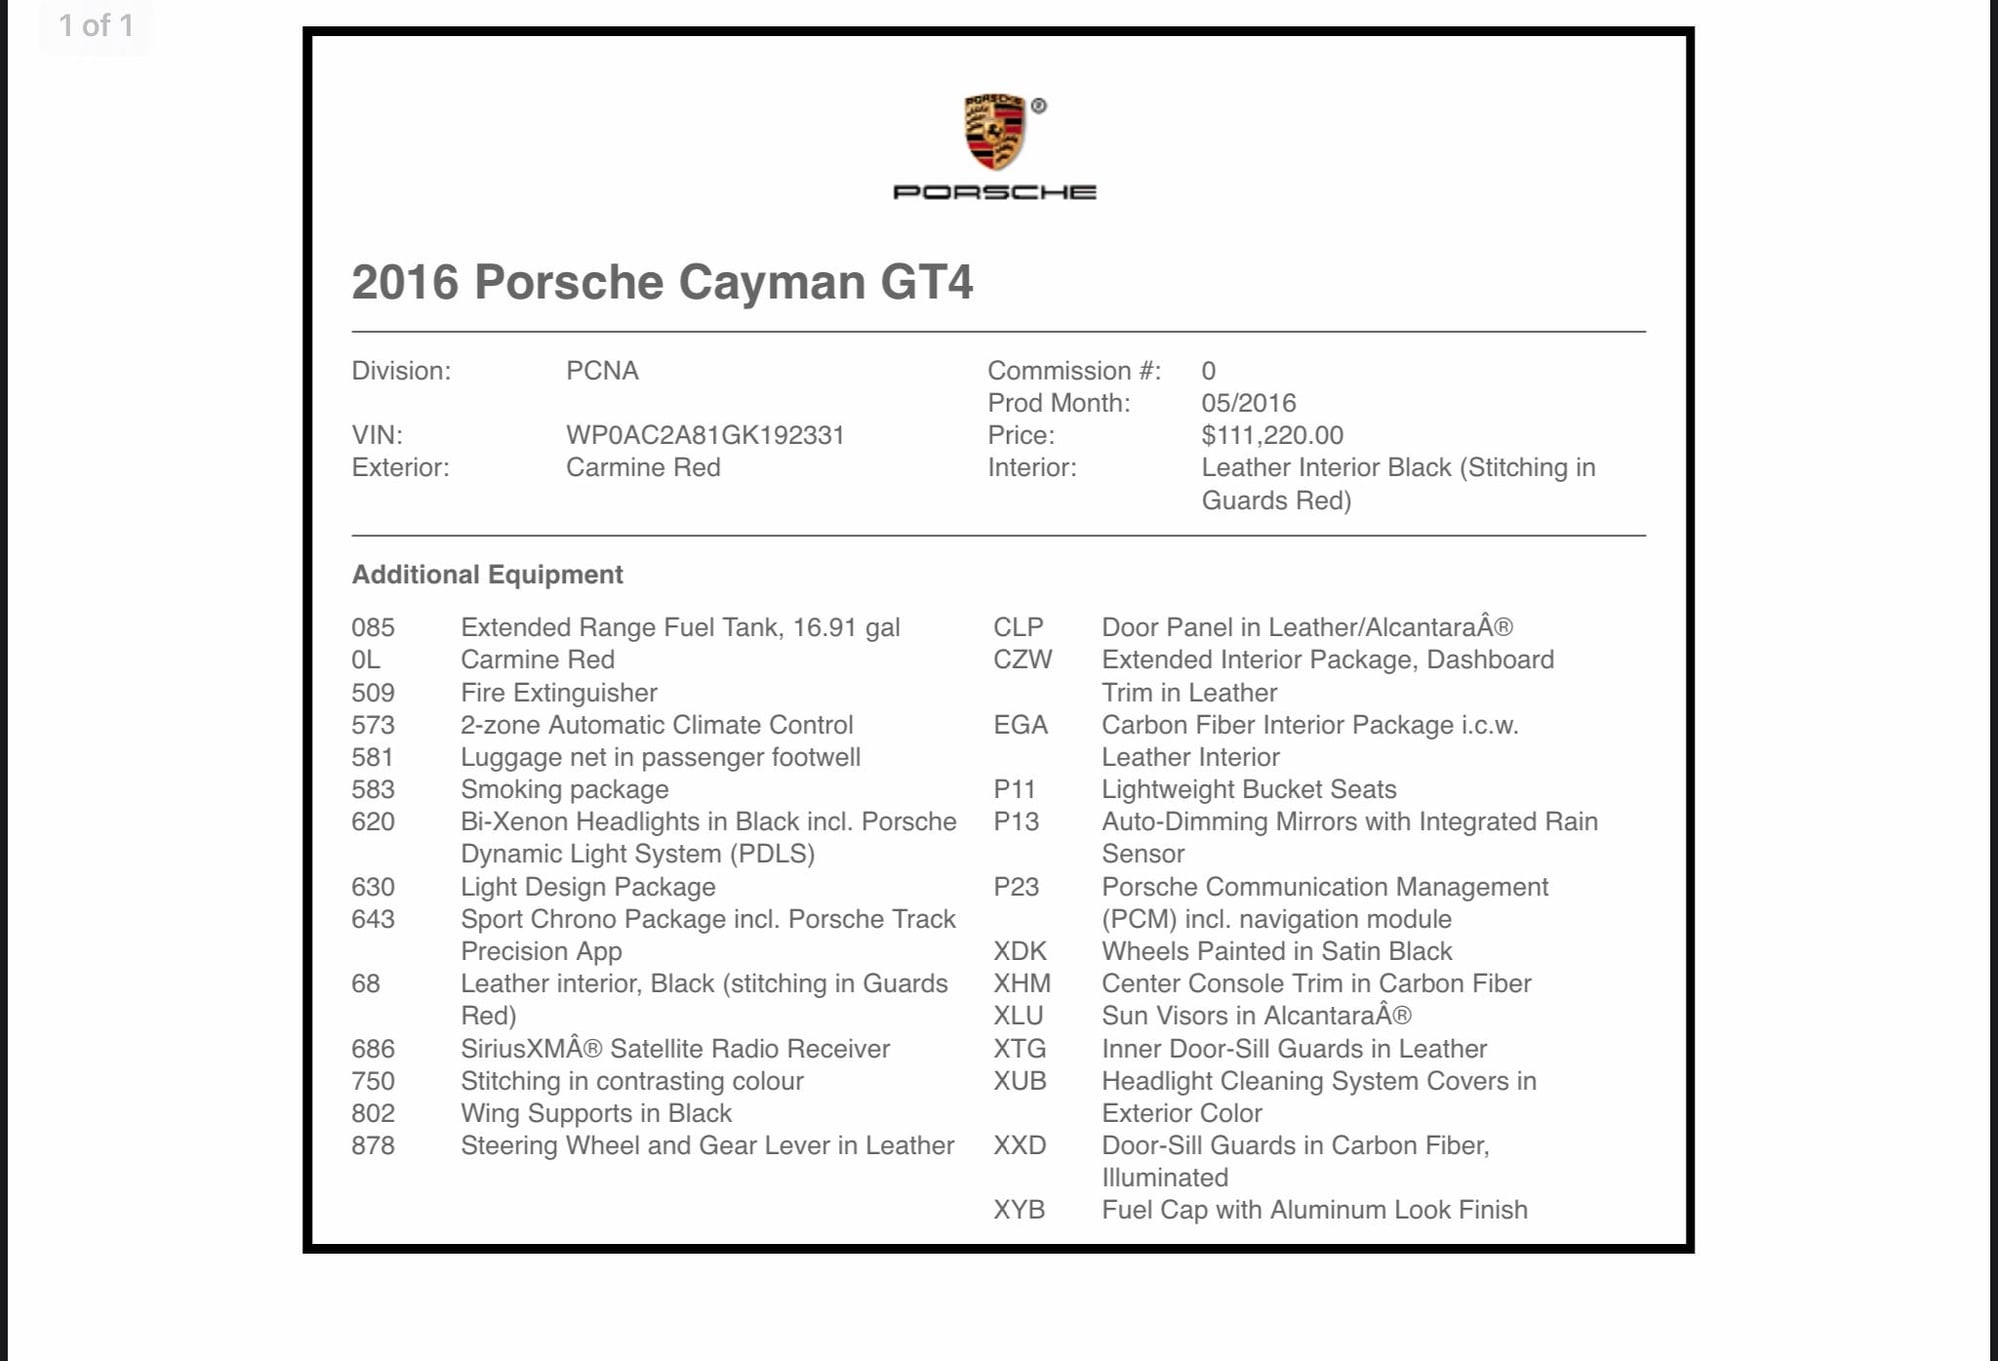 2016 Porsche Cayman GT4 - Porsche Cayman GT4, CPO, Carmine Red,Loaded, ATC Trailer, Track Wheels - Used - VIN WP0AC2A81GK192331 - 13,600 Miles - 6 cyl - 2WD - Manual - Coupe - Red - Sanford, NC 27332, United States